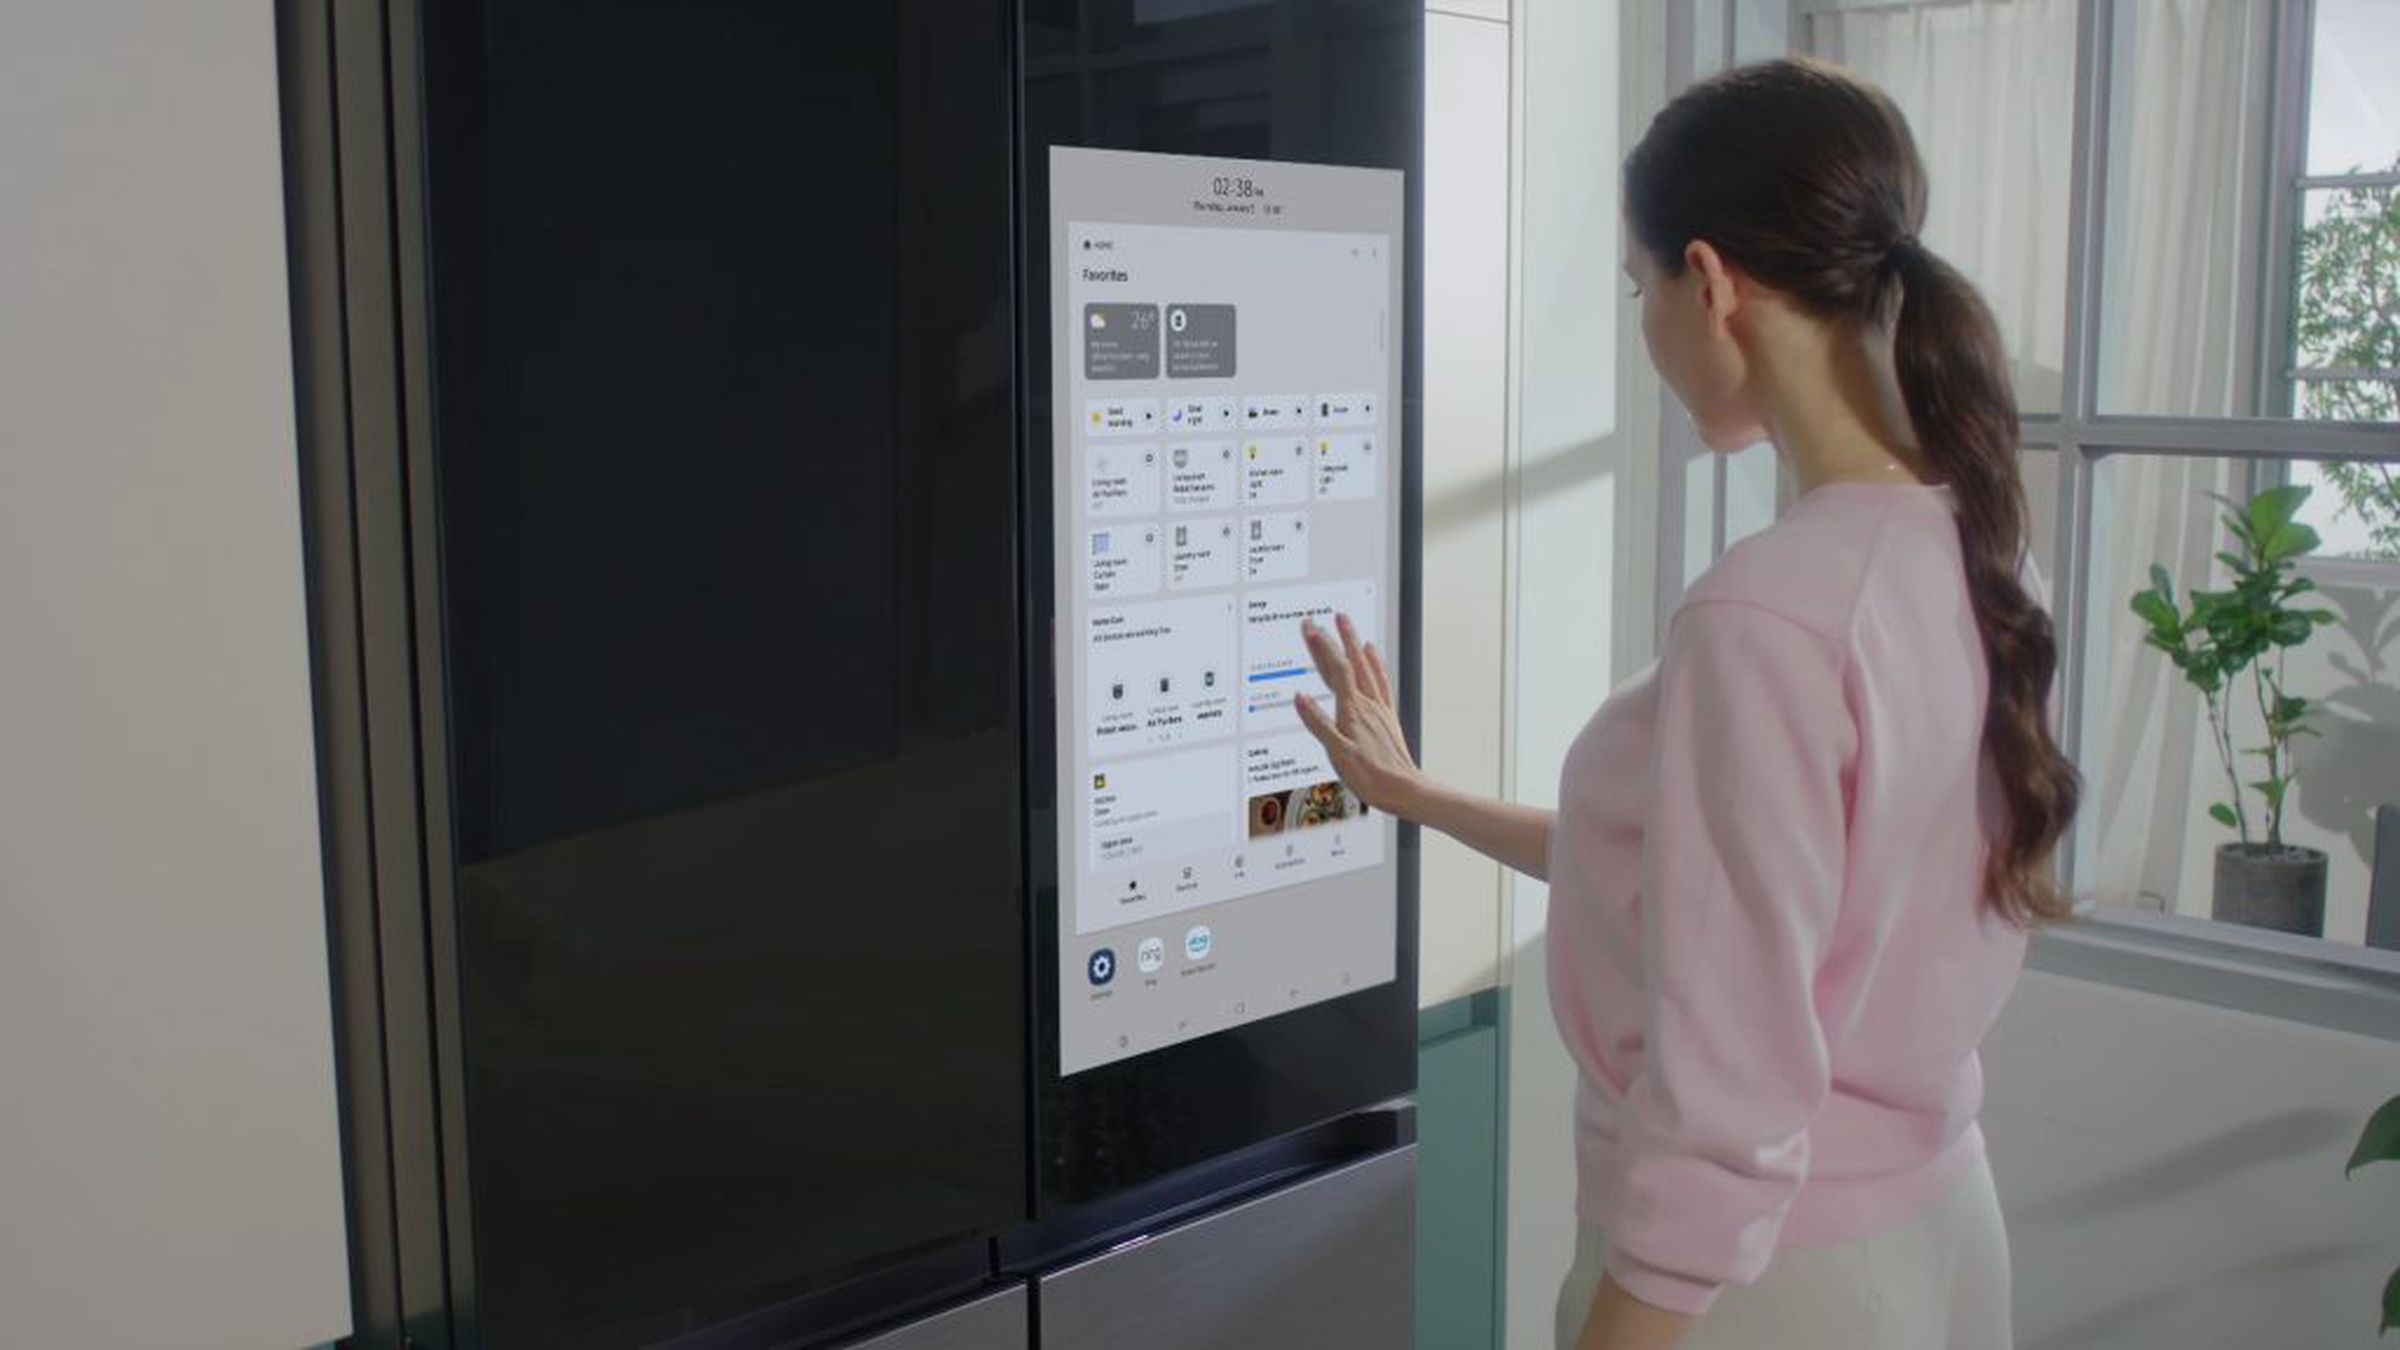 A woman using the Samsung Bespoke Refrigerator Family Hub Plus refrigerator. She is adjusting controls on the touchscreen display in a clean kitchen.